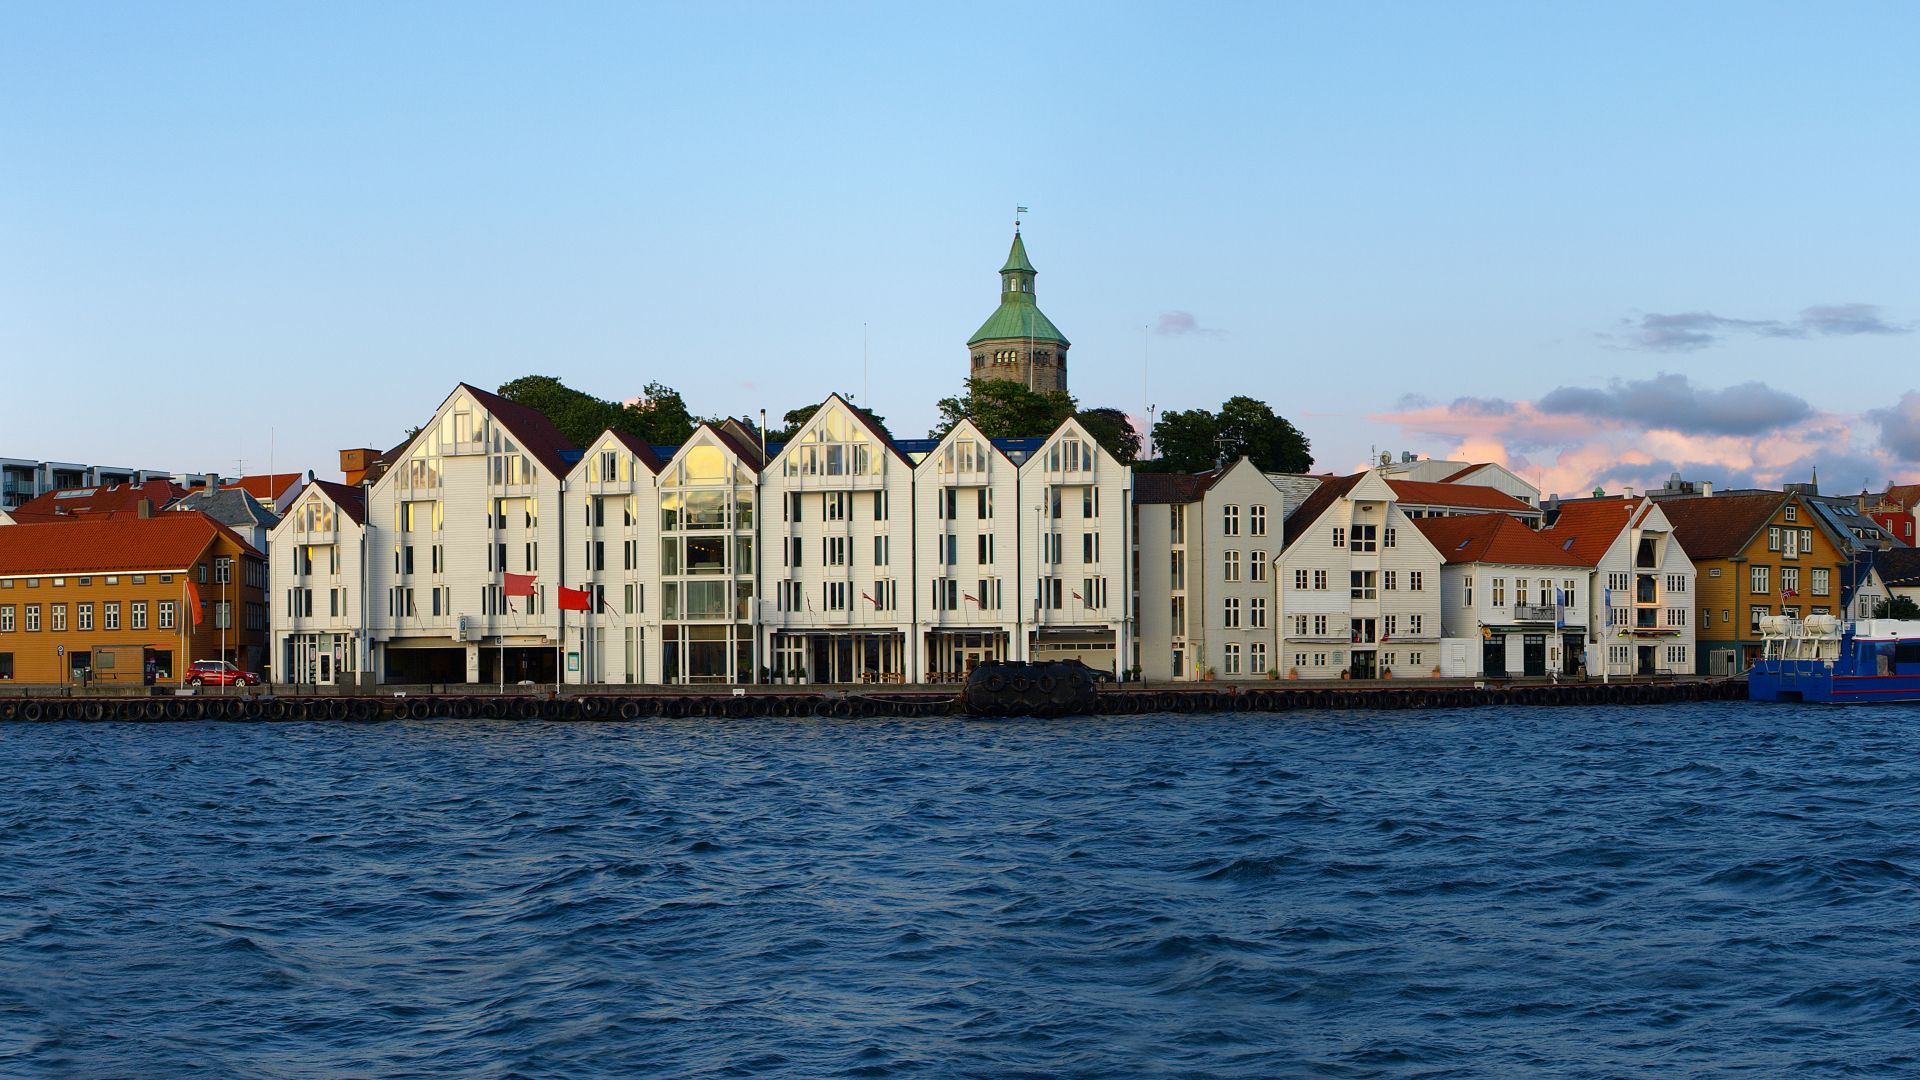 Panoramic view of the port in Stavanger, Norway.